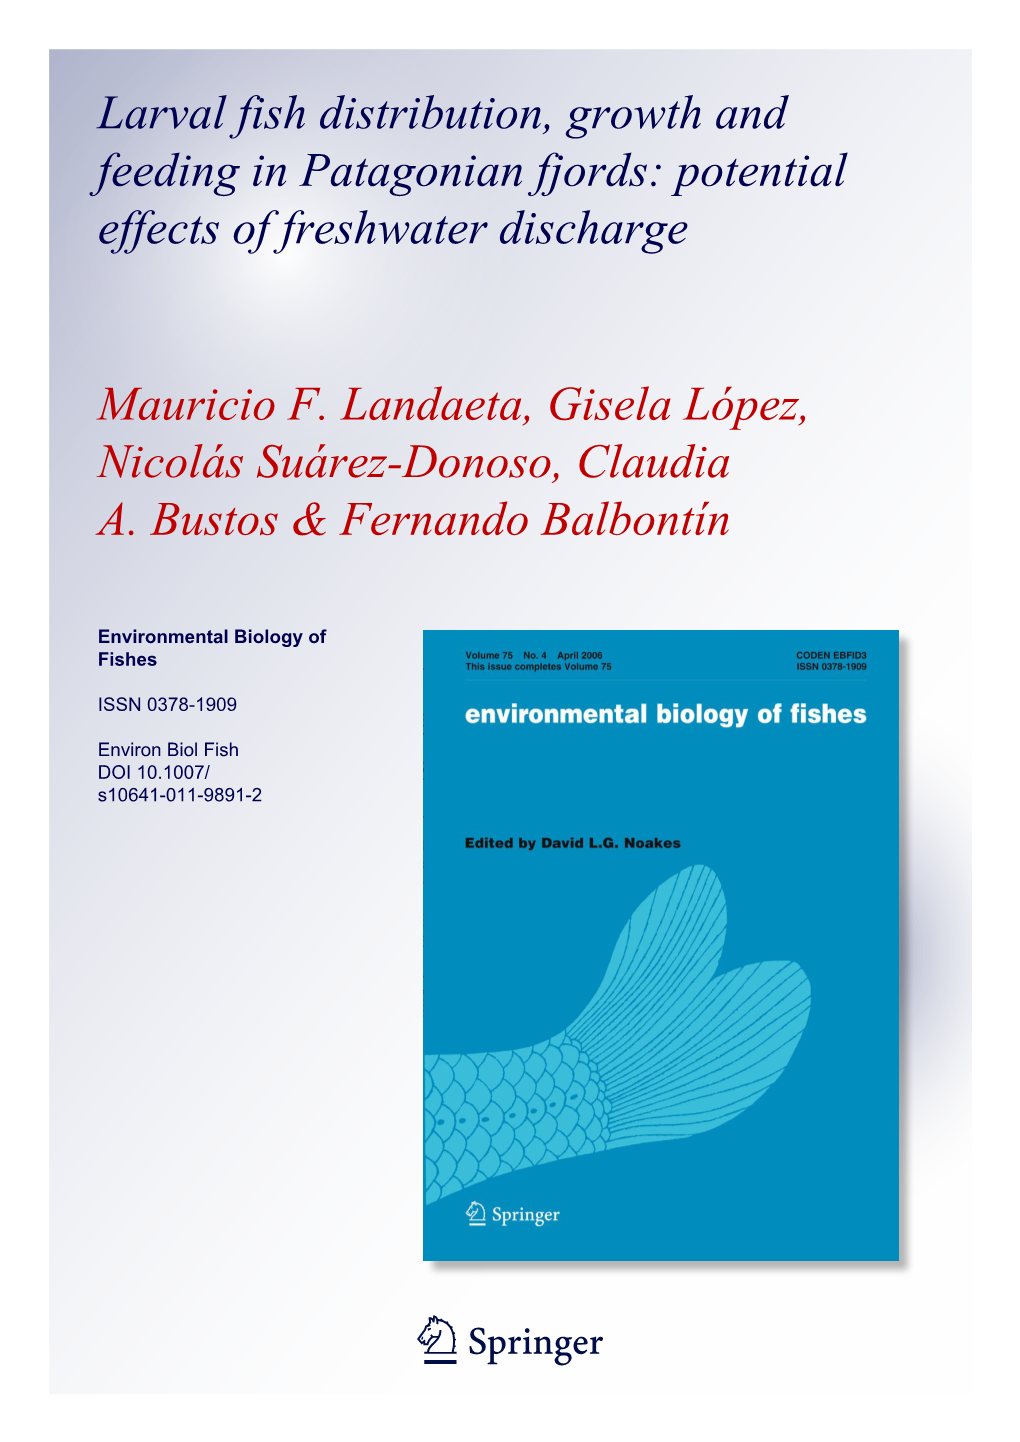 Larval Fish Distribution, Growth and Feeding in Patagonian Fjords: Potential Effects of Freshwater Discharge